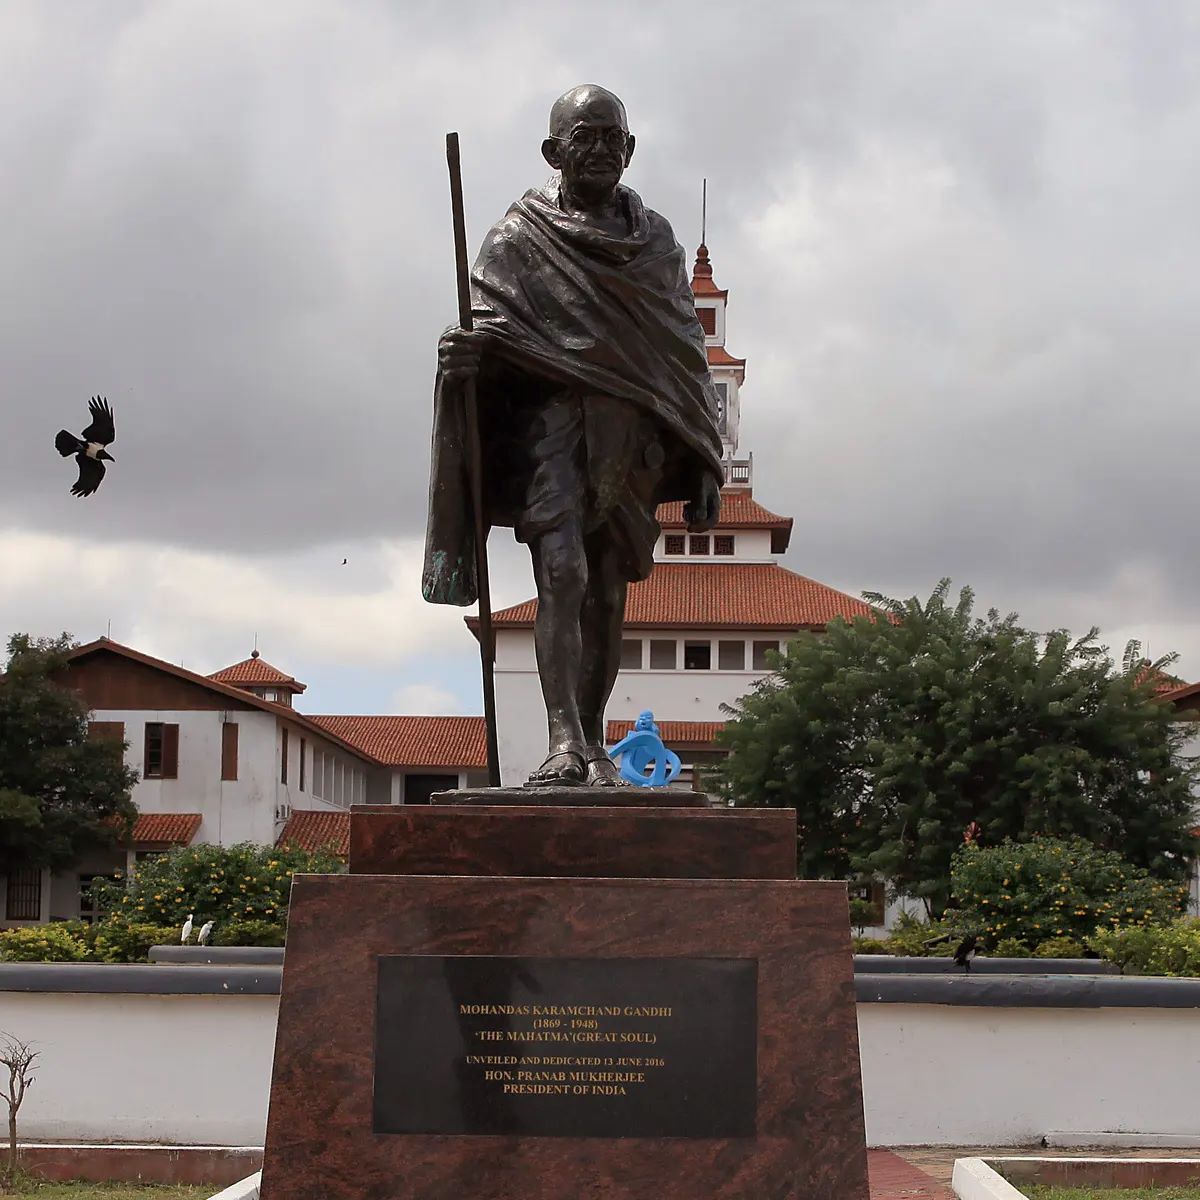 13-captivating-facts-about-the-mahatma-gandhi-statue